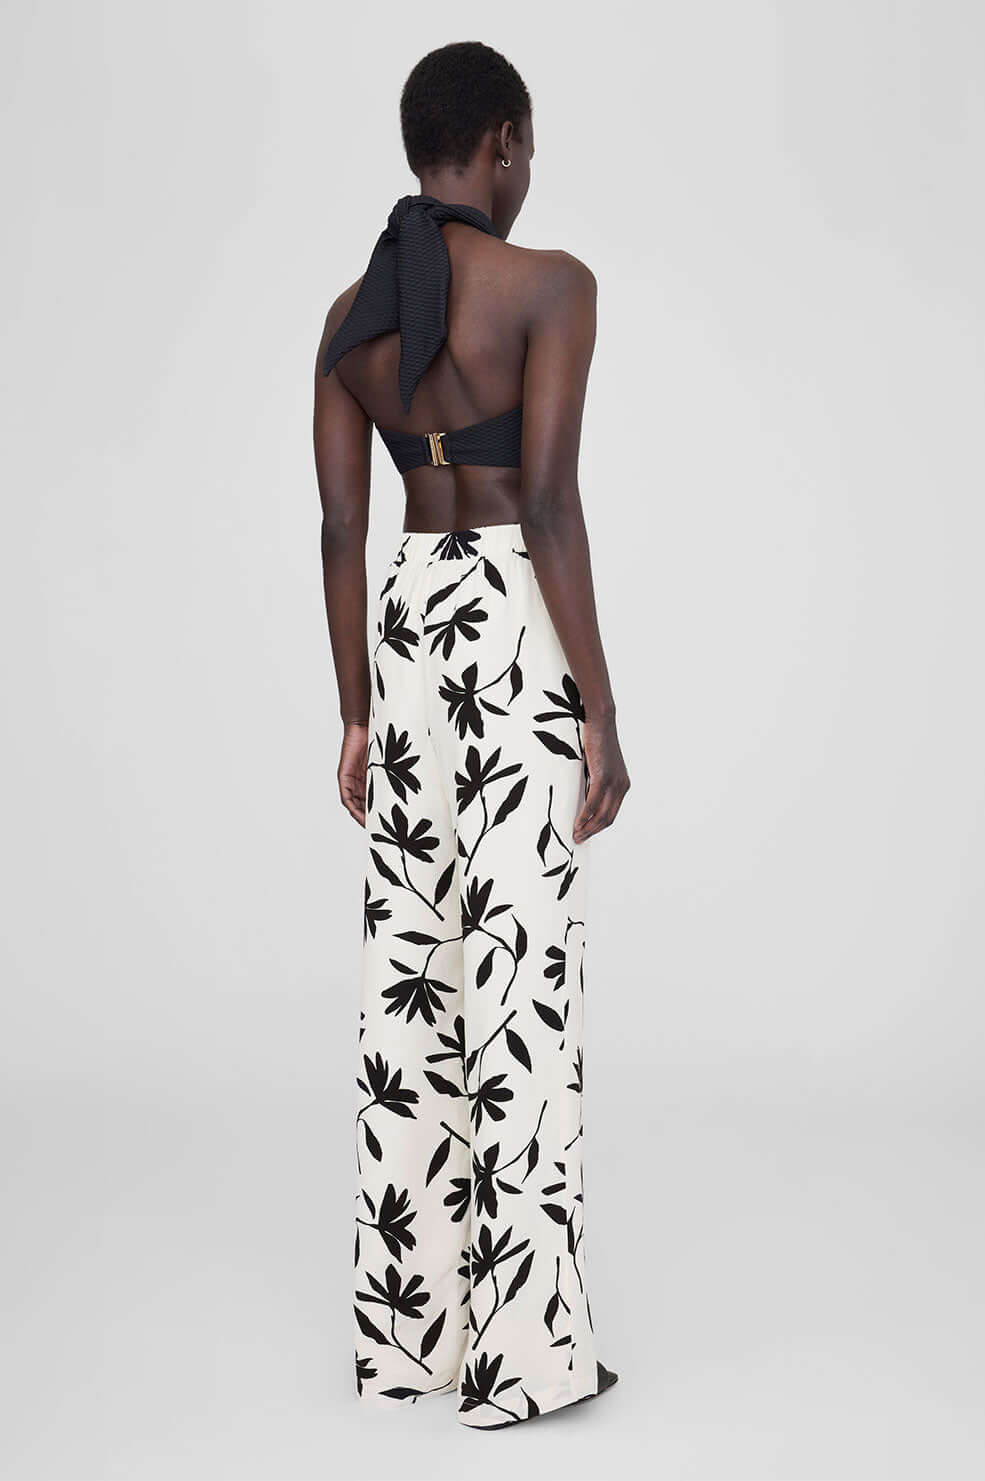 Anine Bing Owen Pant in Ivory Daisy available at TNT The New Trend Australia.